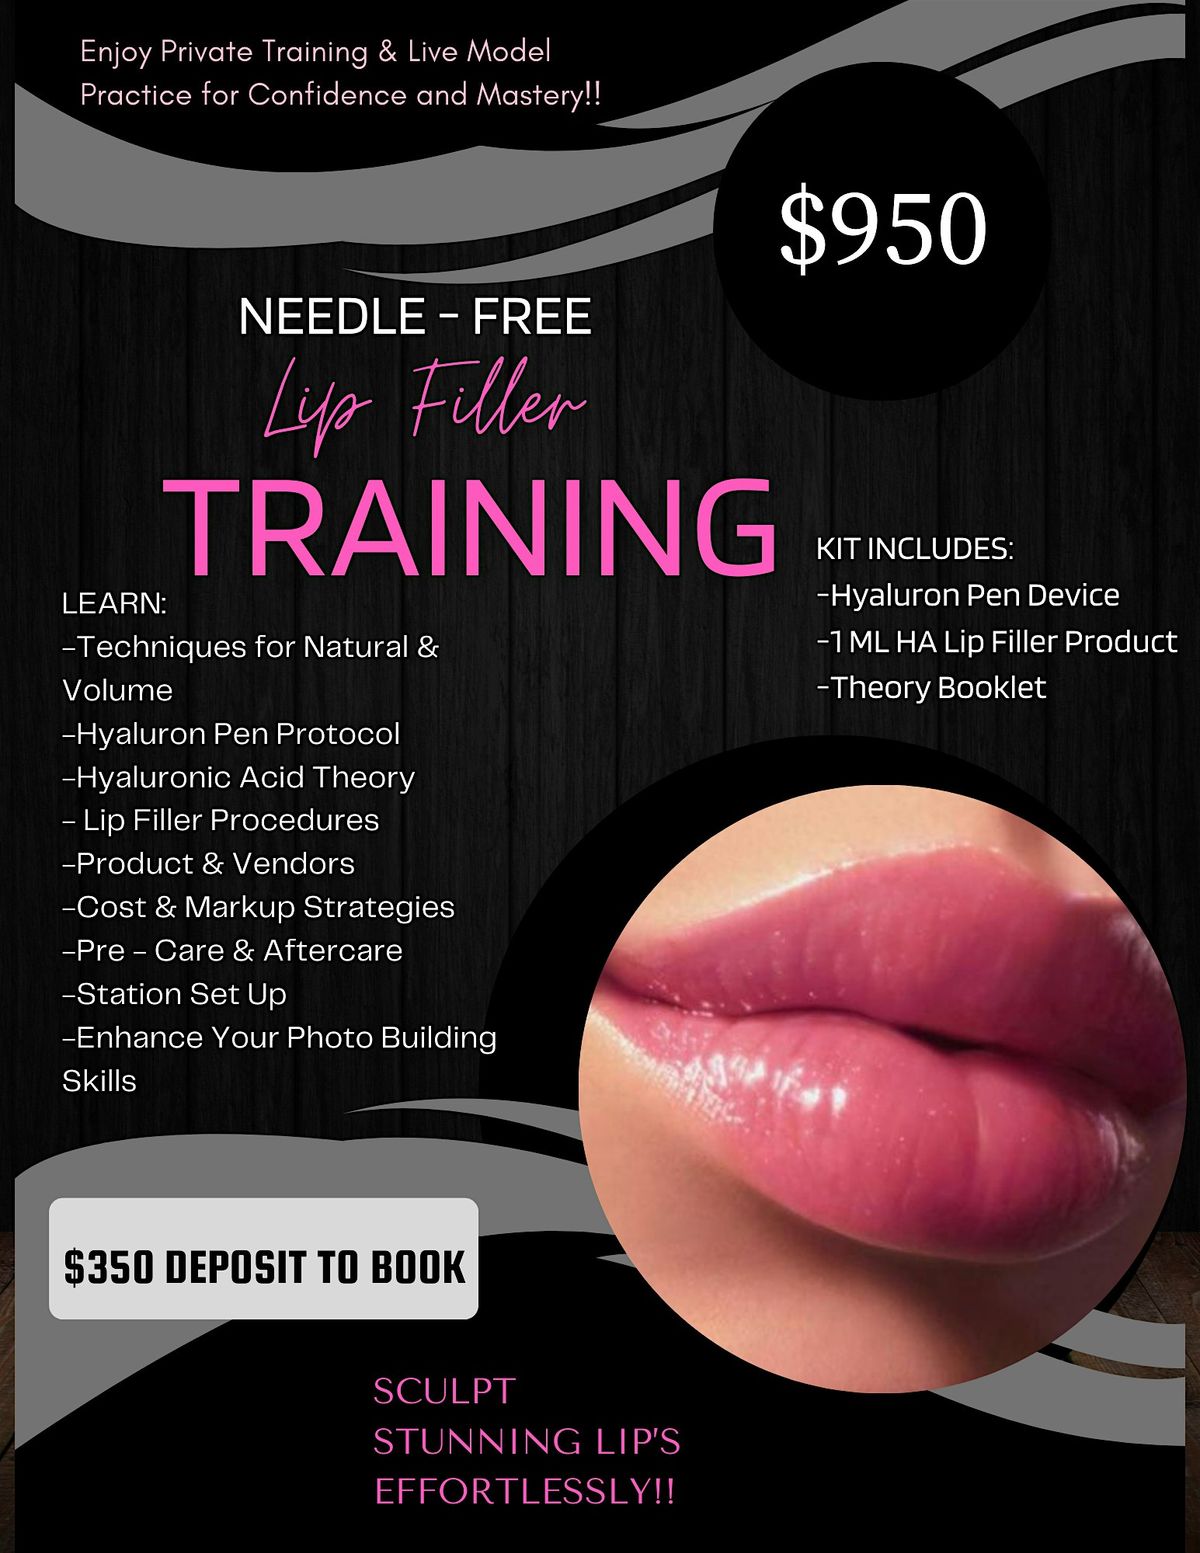 MIAMI \u2022 Needle - Free Lip Filler Training With The Hyaluron Pen Device